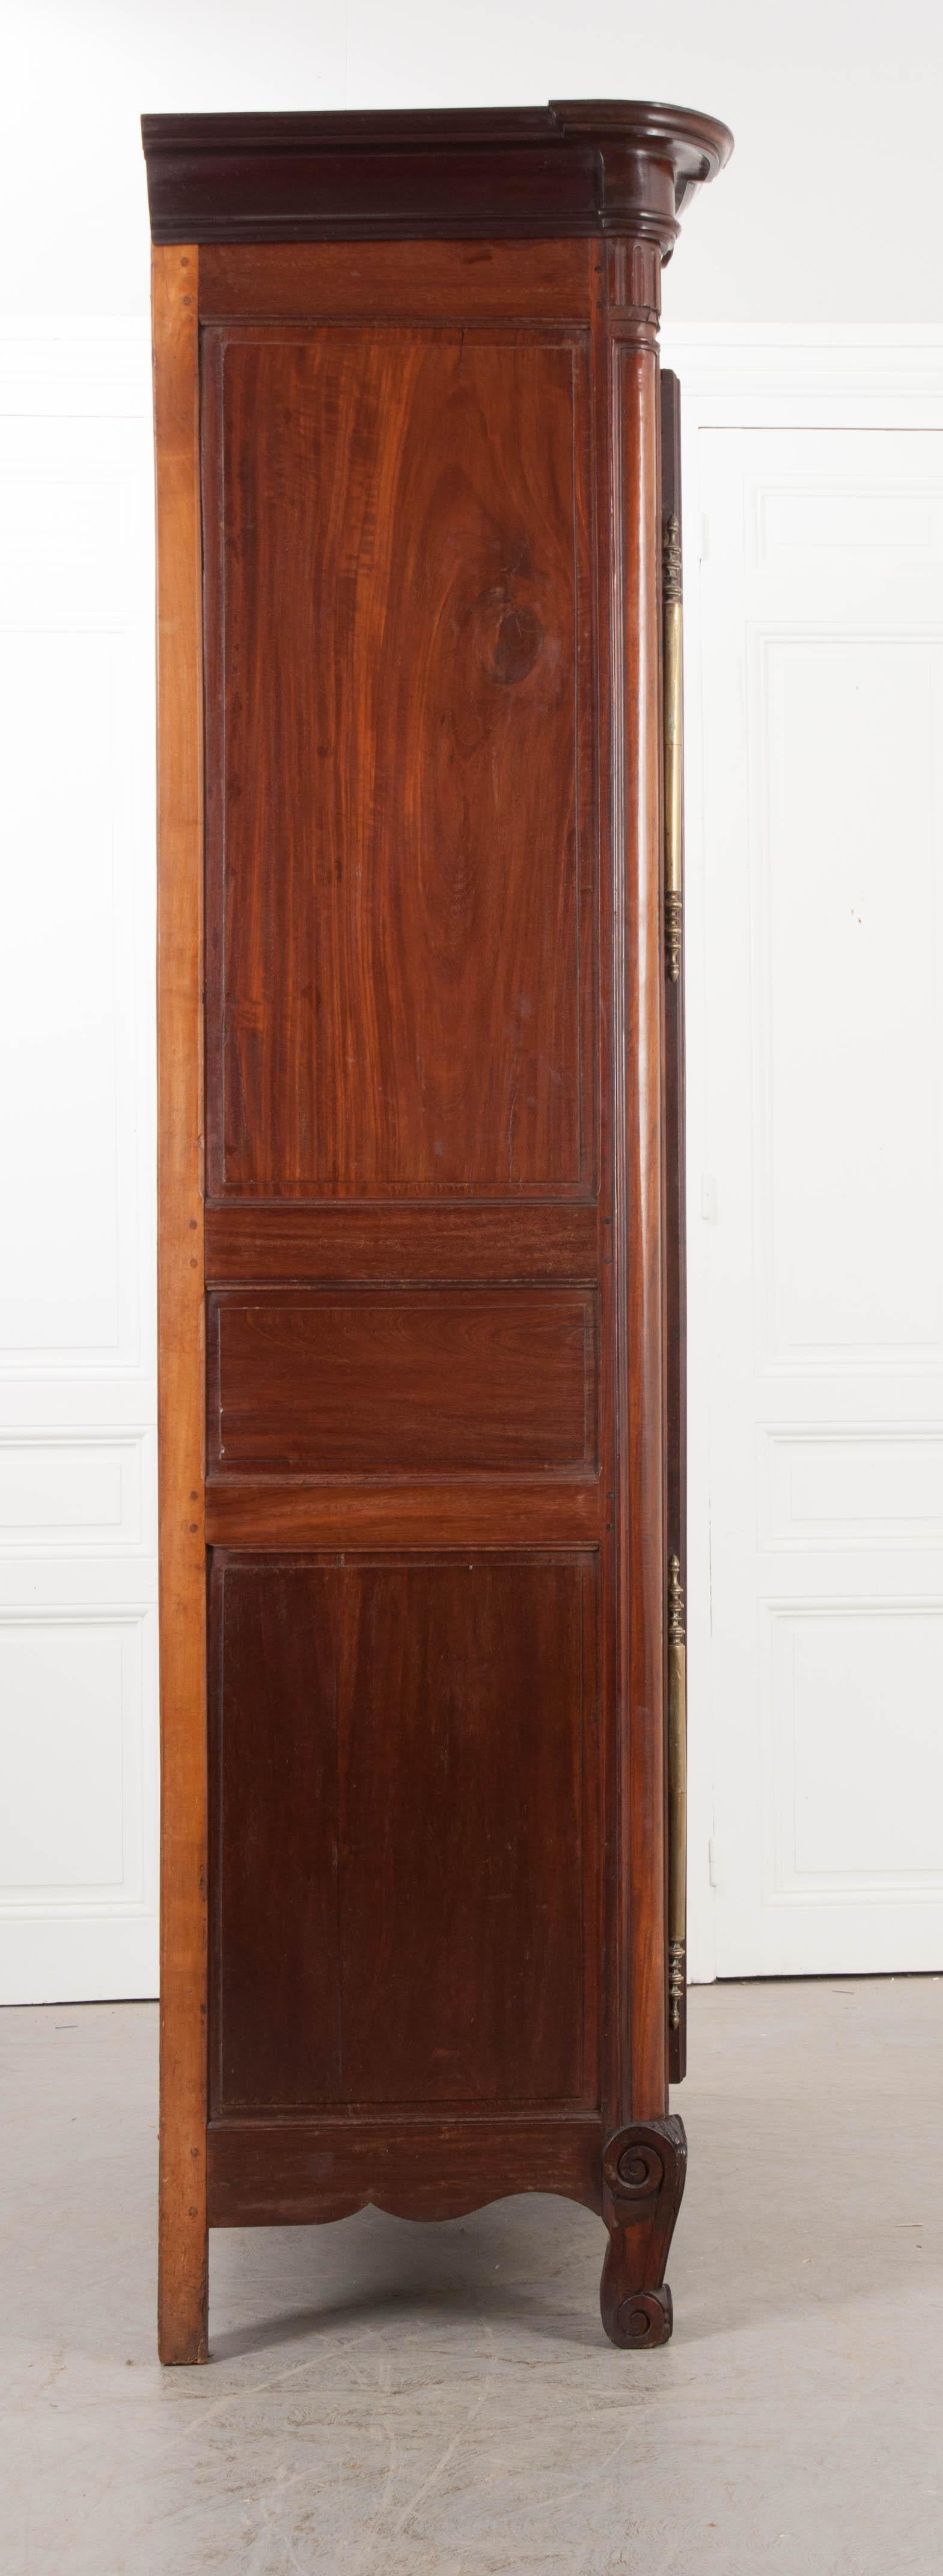 French 18th Century Mahogany Armoire from the Port of Normandy 4